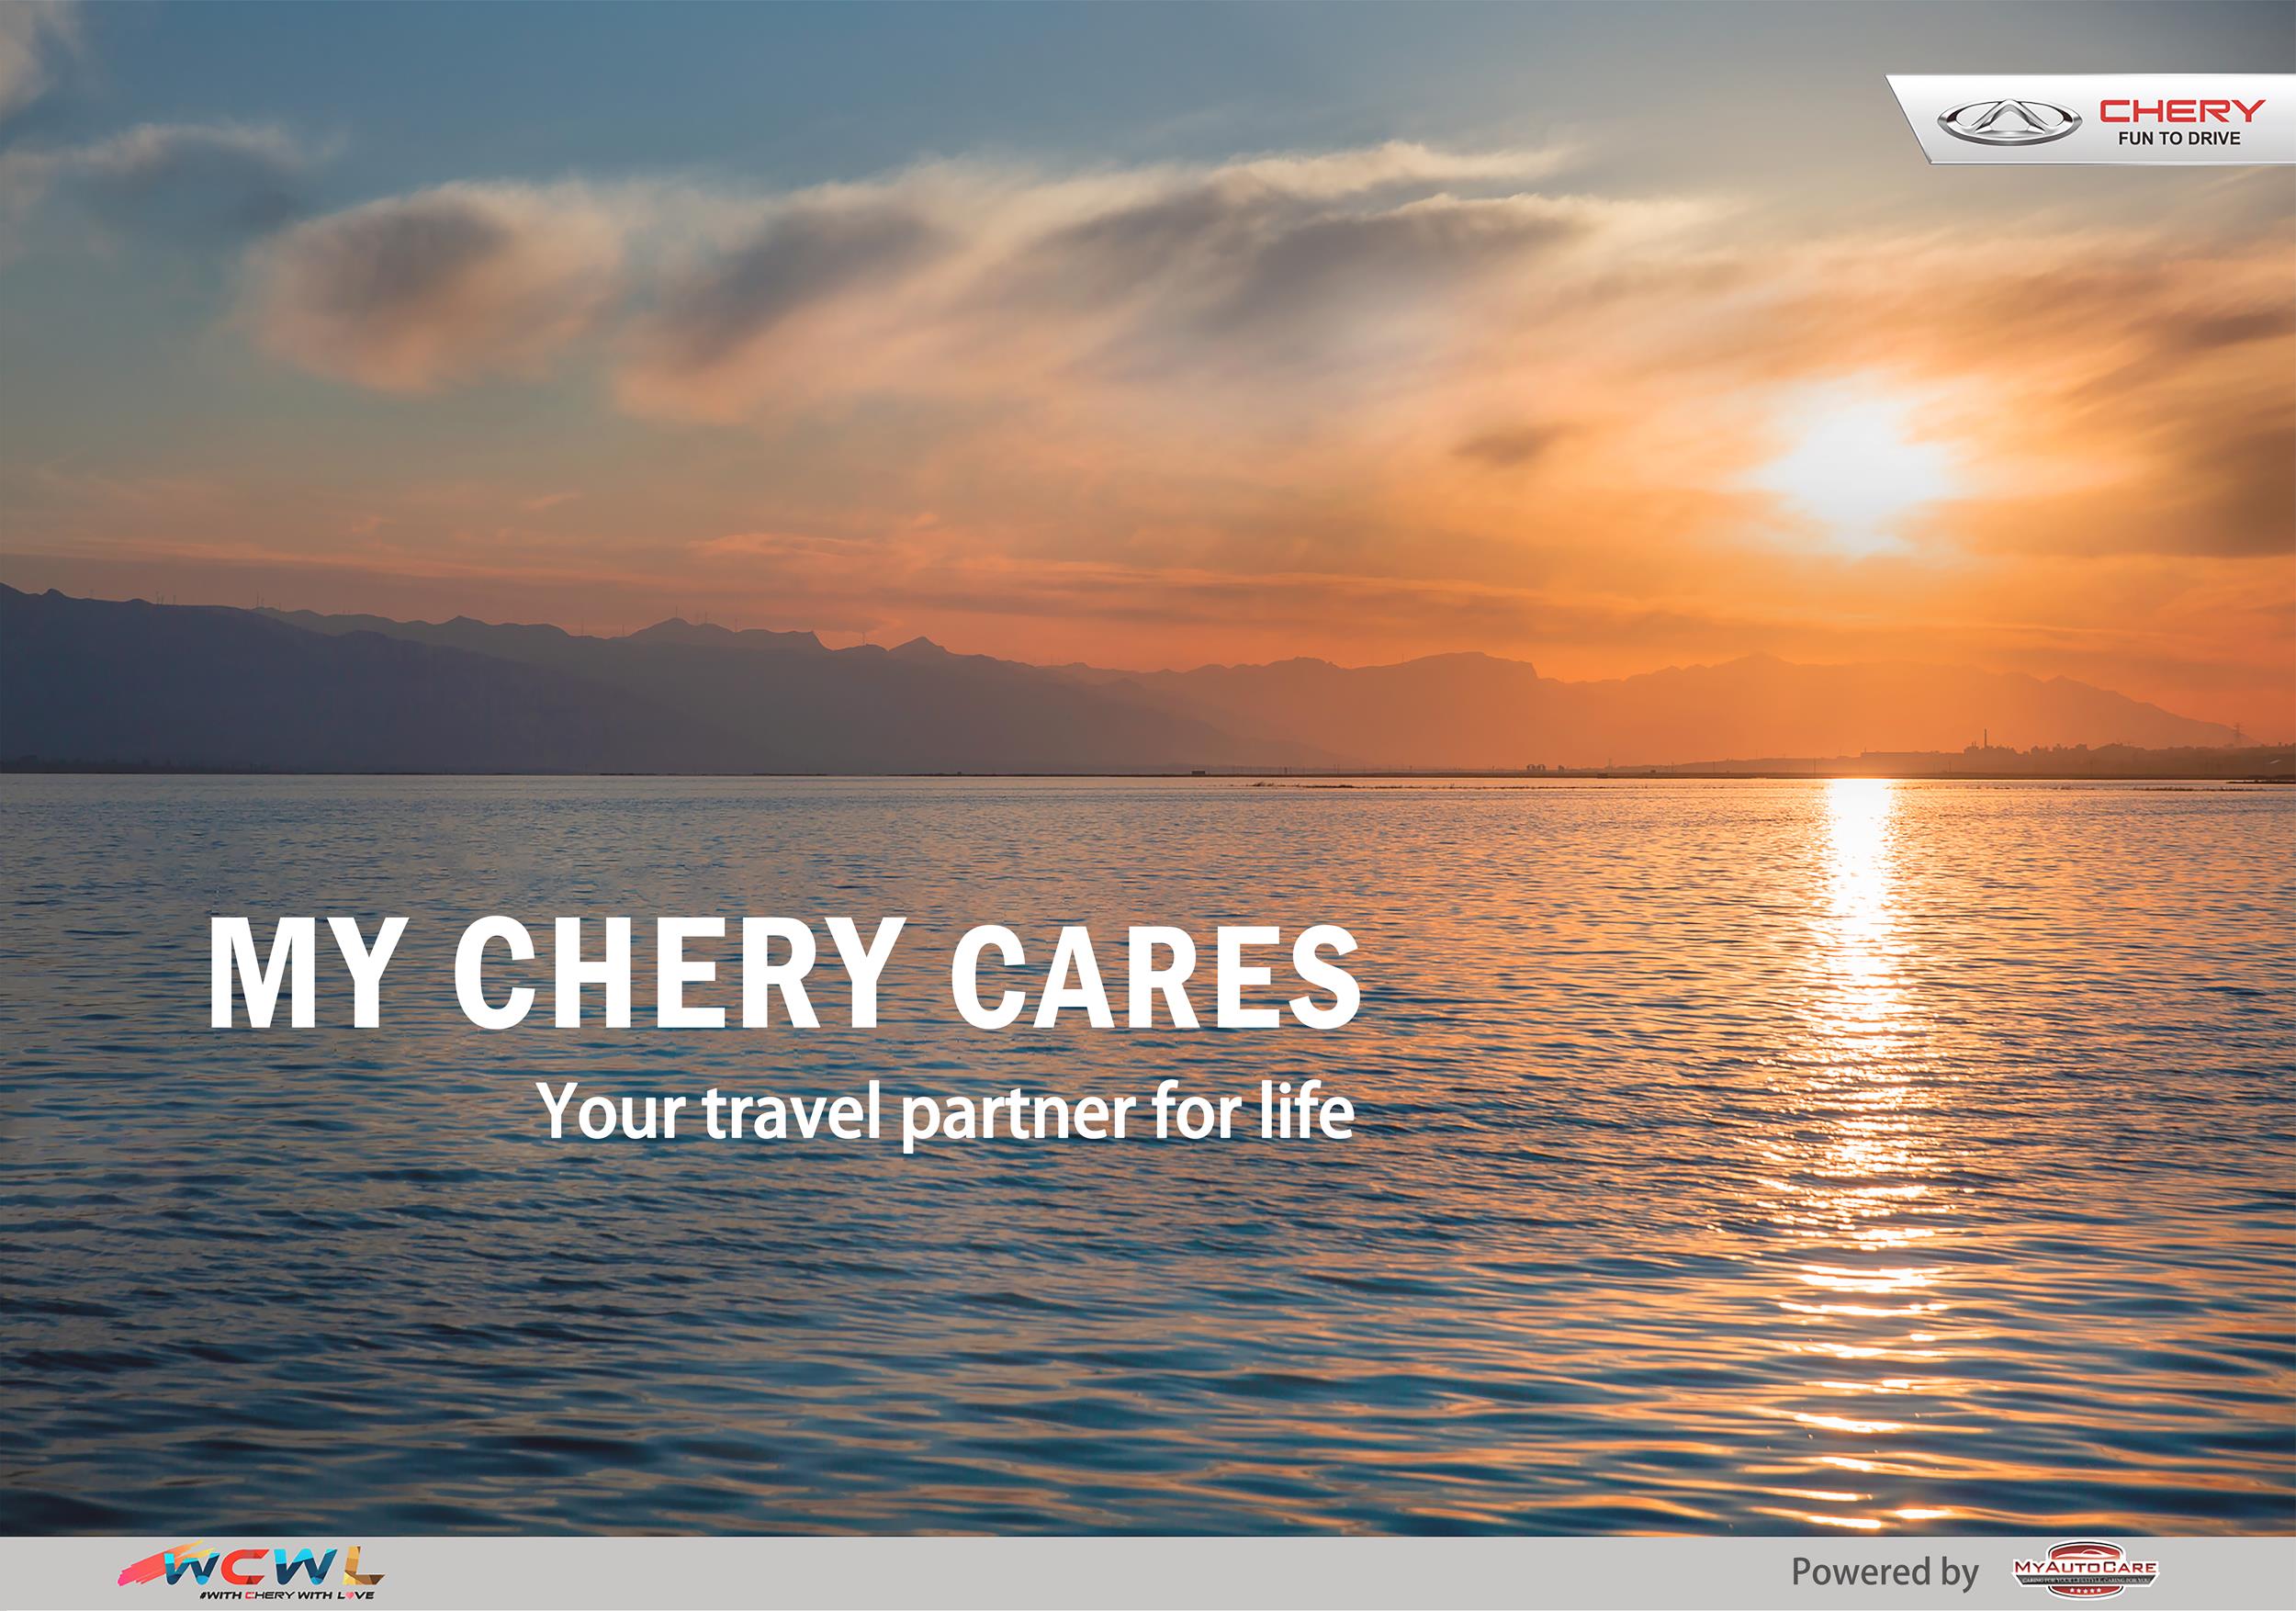 Chery pours on the love with MyCheryCares